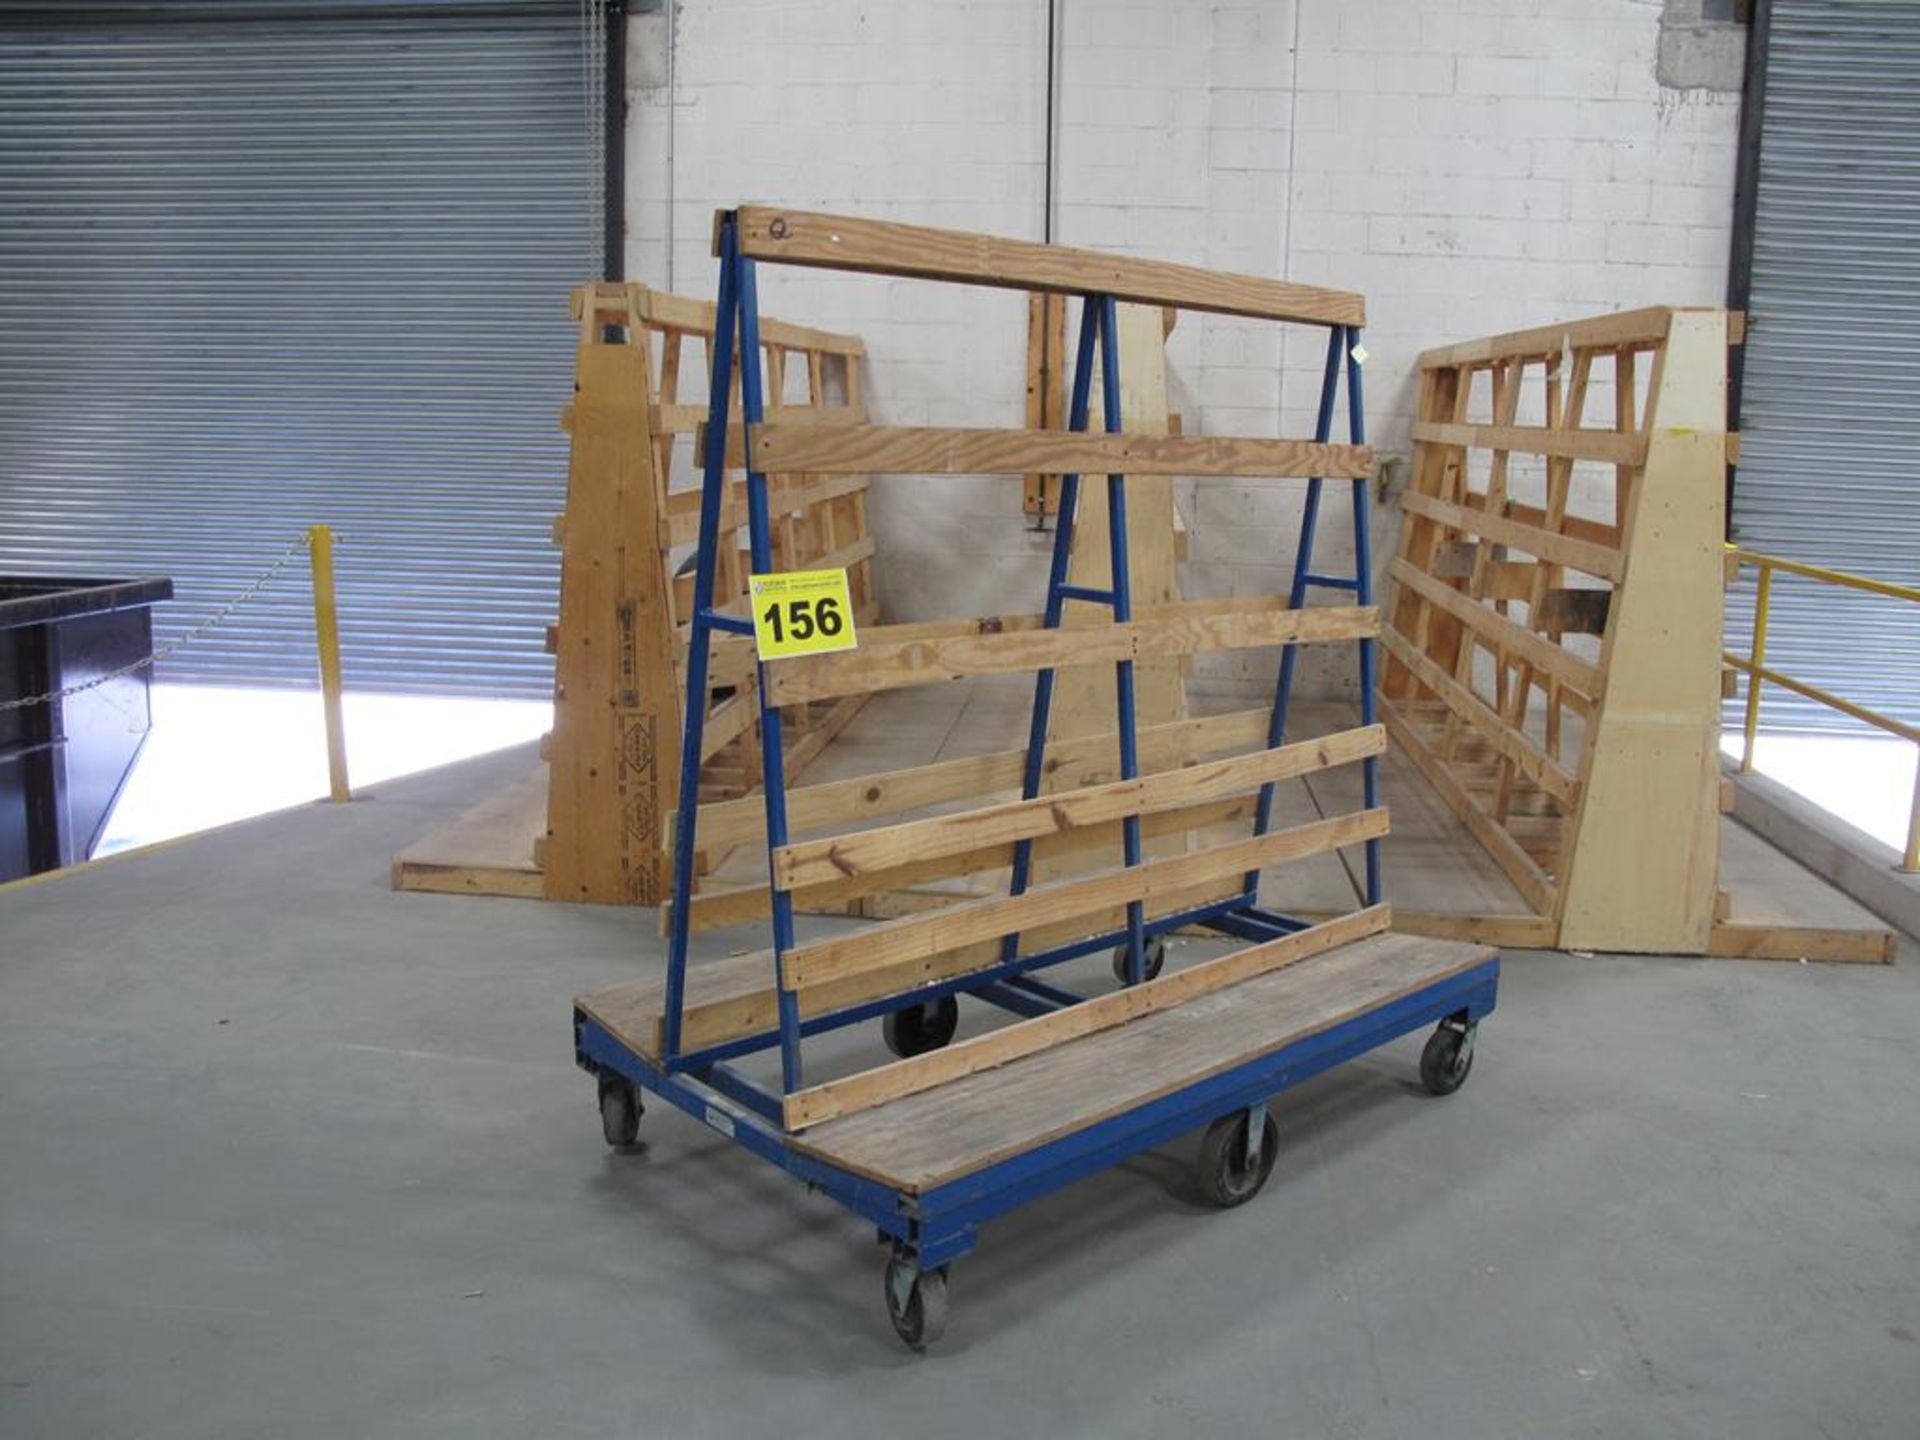 GRF, 3,000 LBS (APPROX.), 5' X 6' X 45", DOUBLE SIDED, ROLLING PRODUCTION GLASS RACK